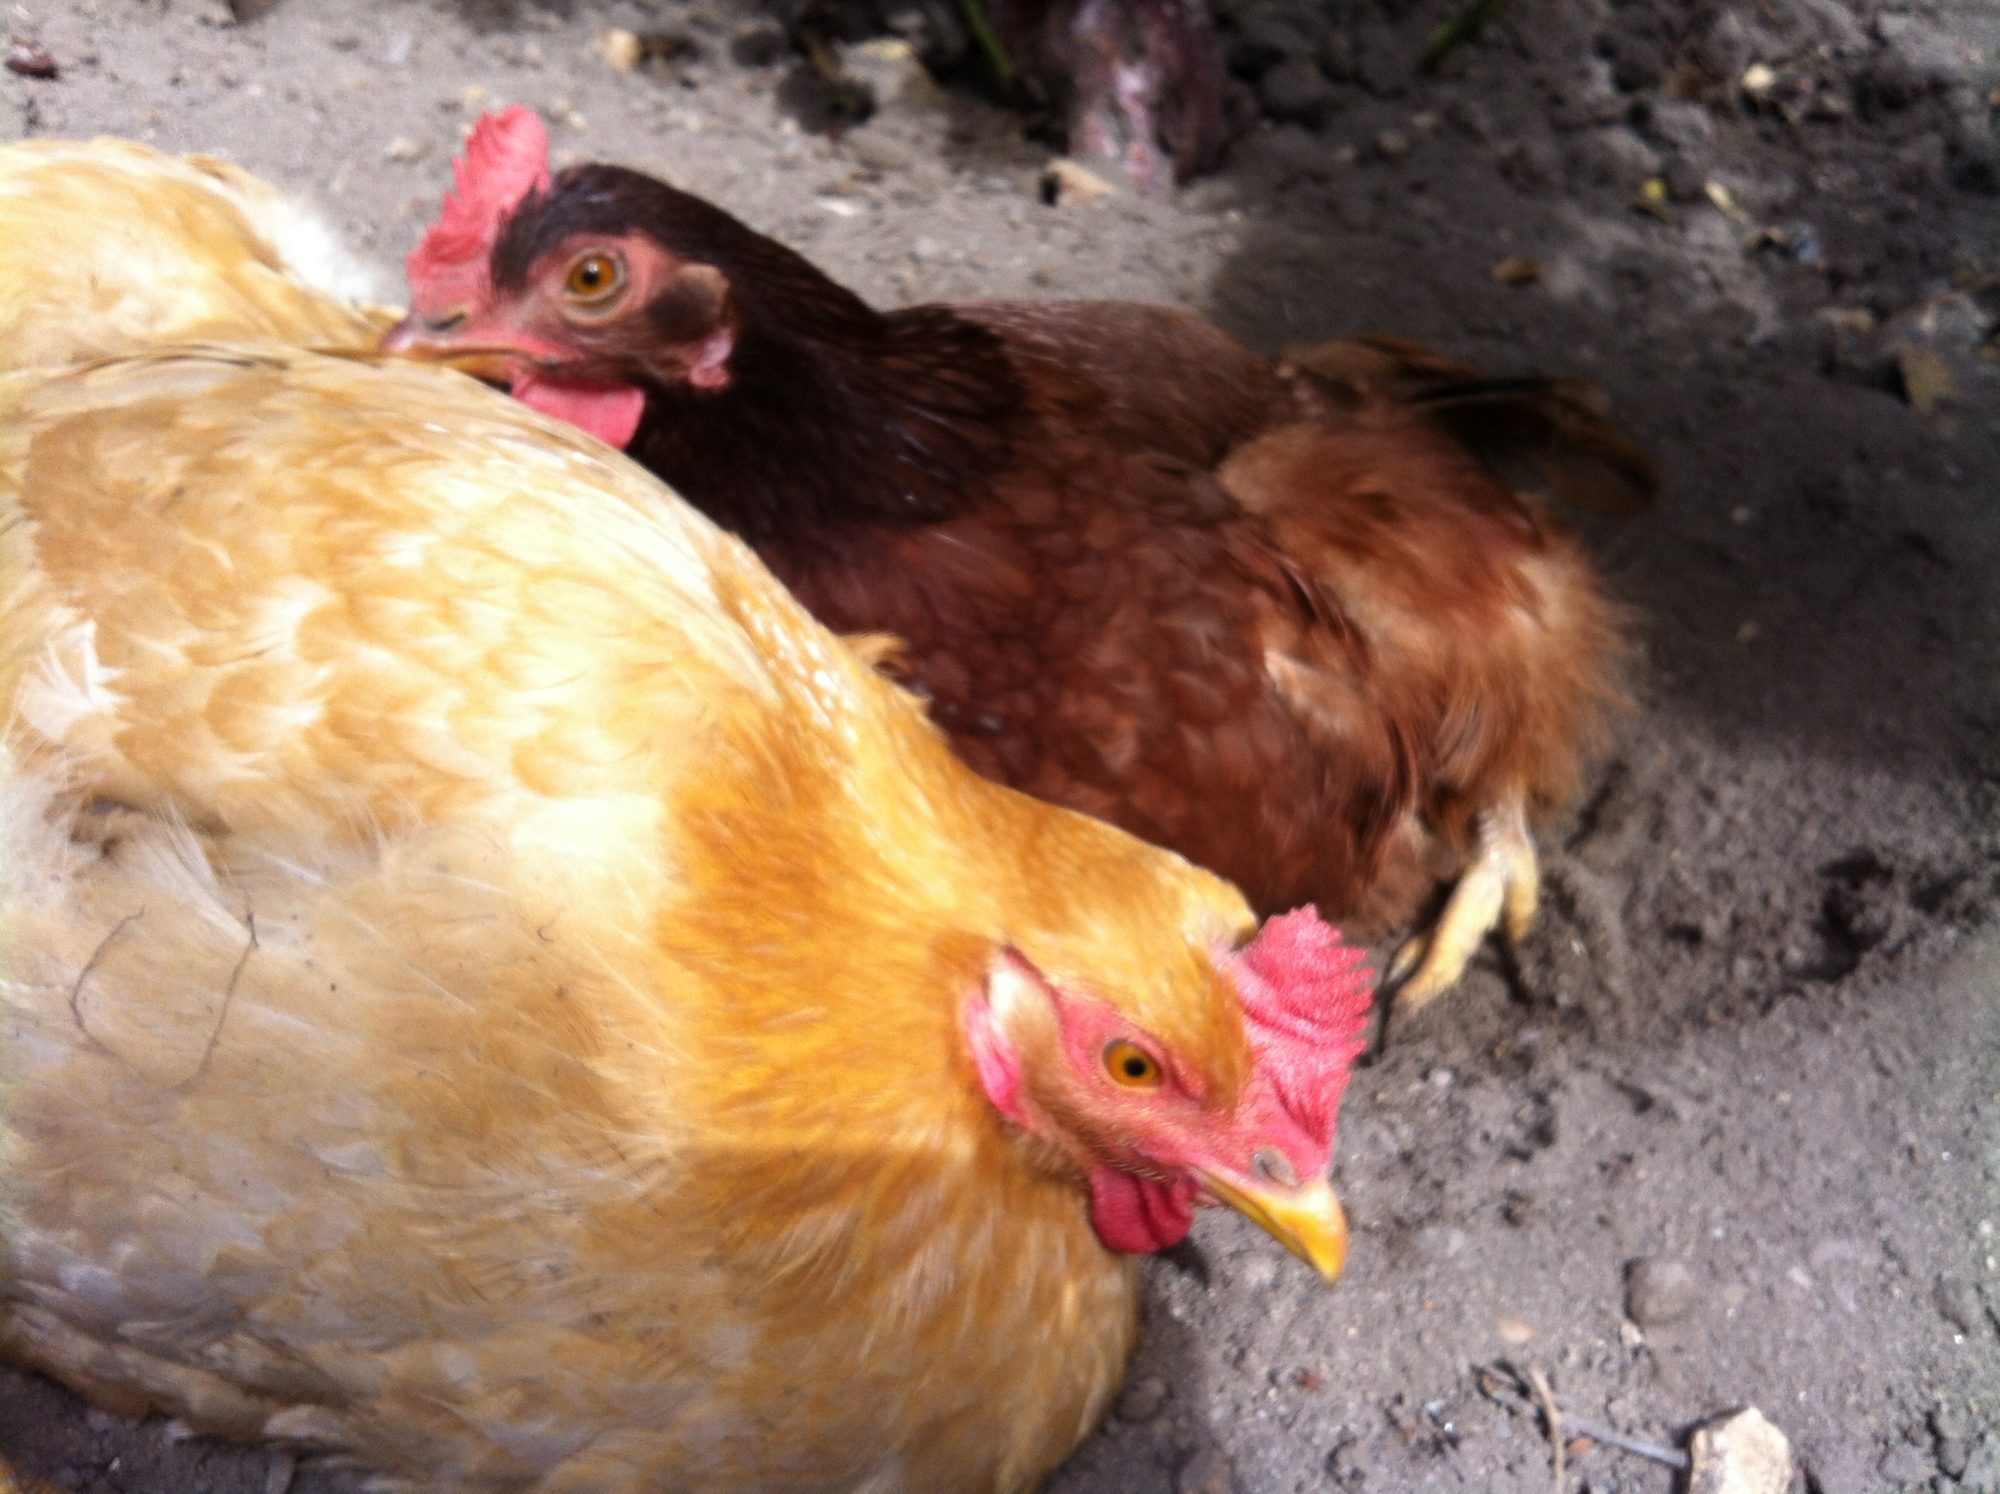 Lily and Daisy were raised together ever since they were chicks. Ever since then, they were inseparable, until Lily (yellow chicken) passed away during a raccoon fight. 
Daisy (Boston Red) was heartbroken, until she met a new chicken named Tulip. But there will always be a spot in her heart for Lily.